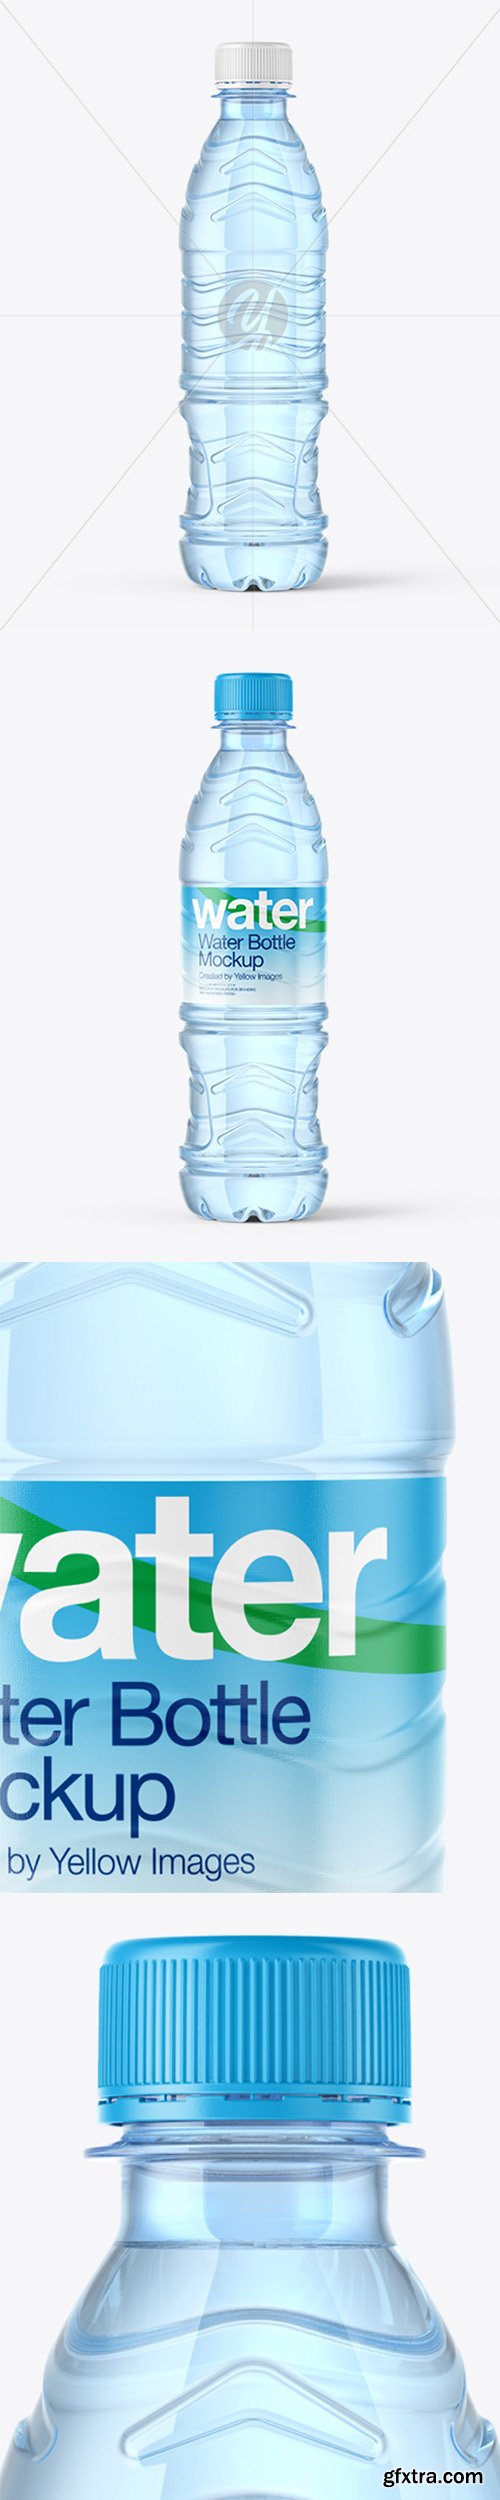 Download Blue Pet Water Bottle Mockup 19636 Gfxtra Yellowimages Mockups